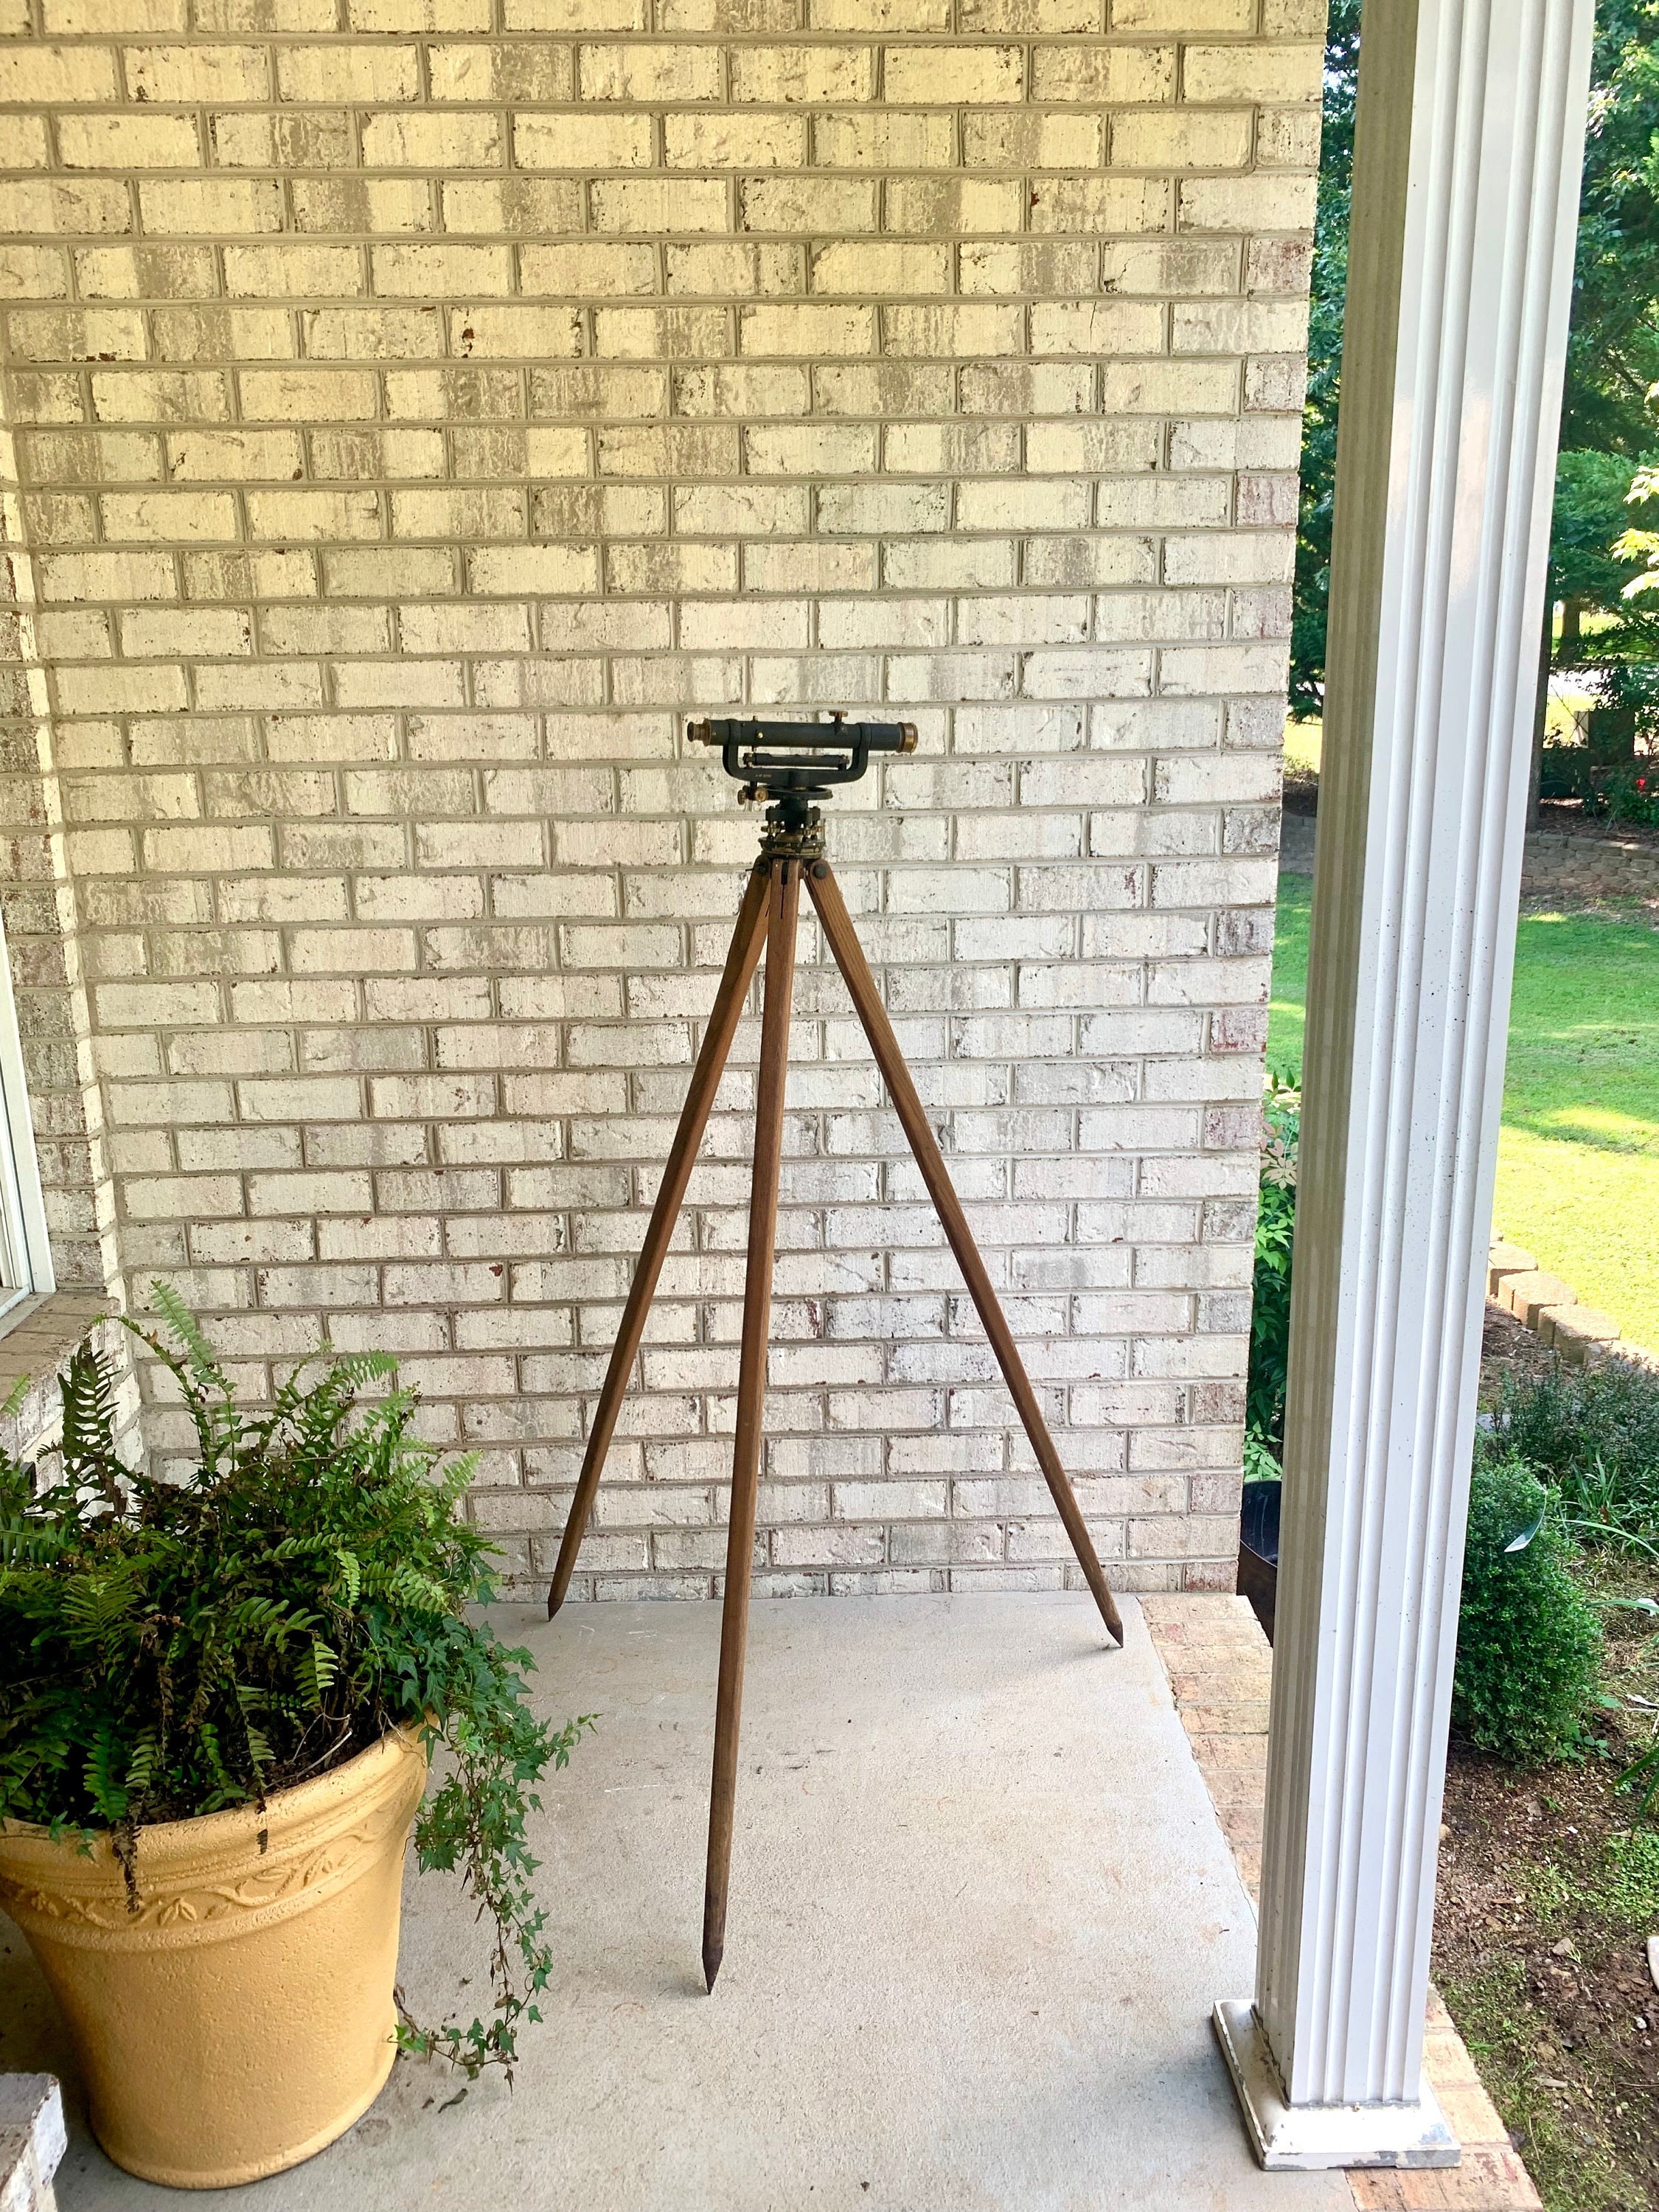 Heavy Duty Survey wooden tripod stand for theodolite auto level heavy duty  stand